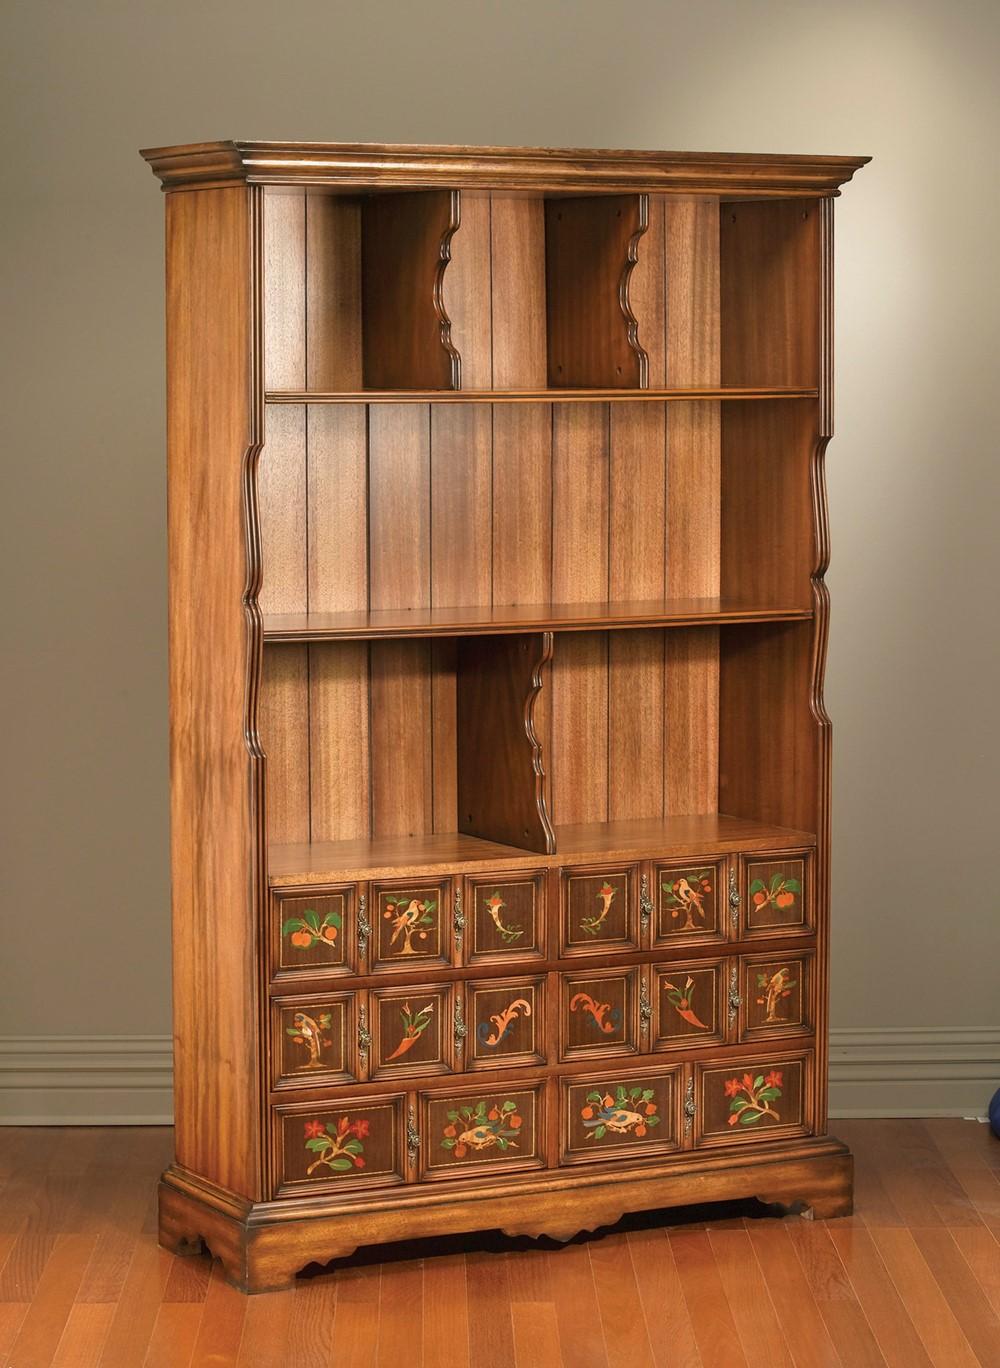 AaImporting 38826 Bookcase